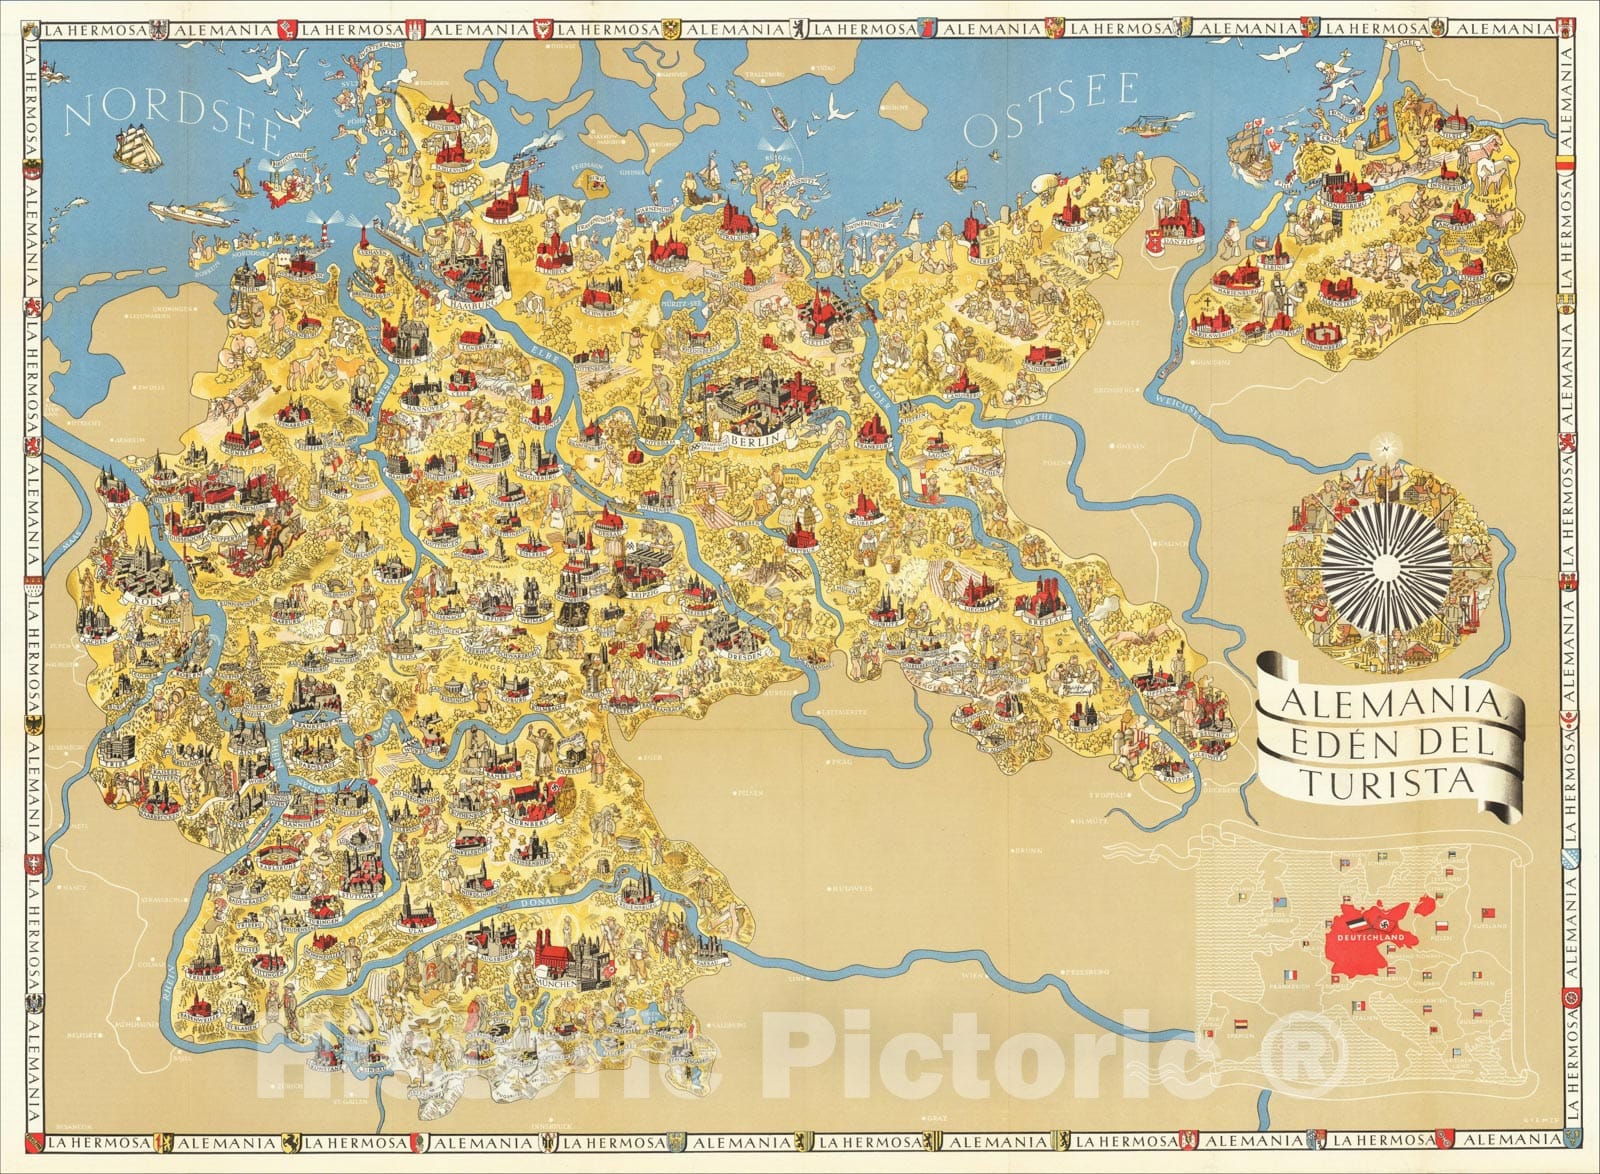 Historic Map : (Second World War - Nazi Germany) Alemania Eden Del Turista [Germany The Paradise of Tourism.], 1935, Riemer, Vintage Wall Art